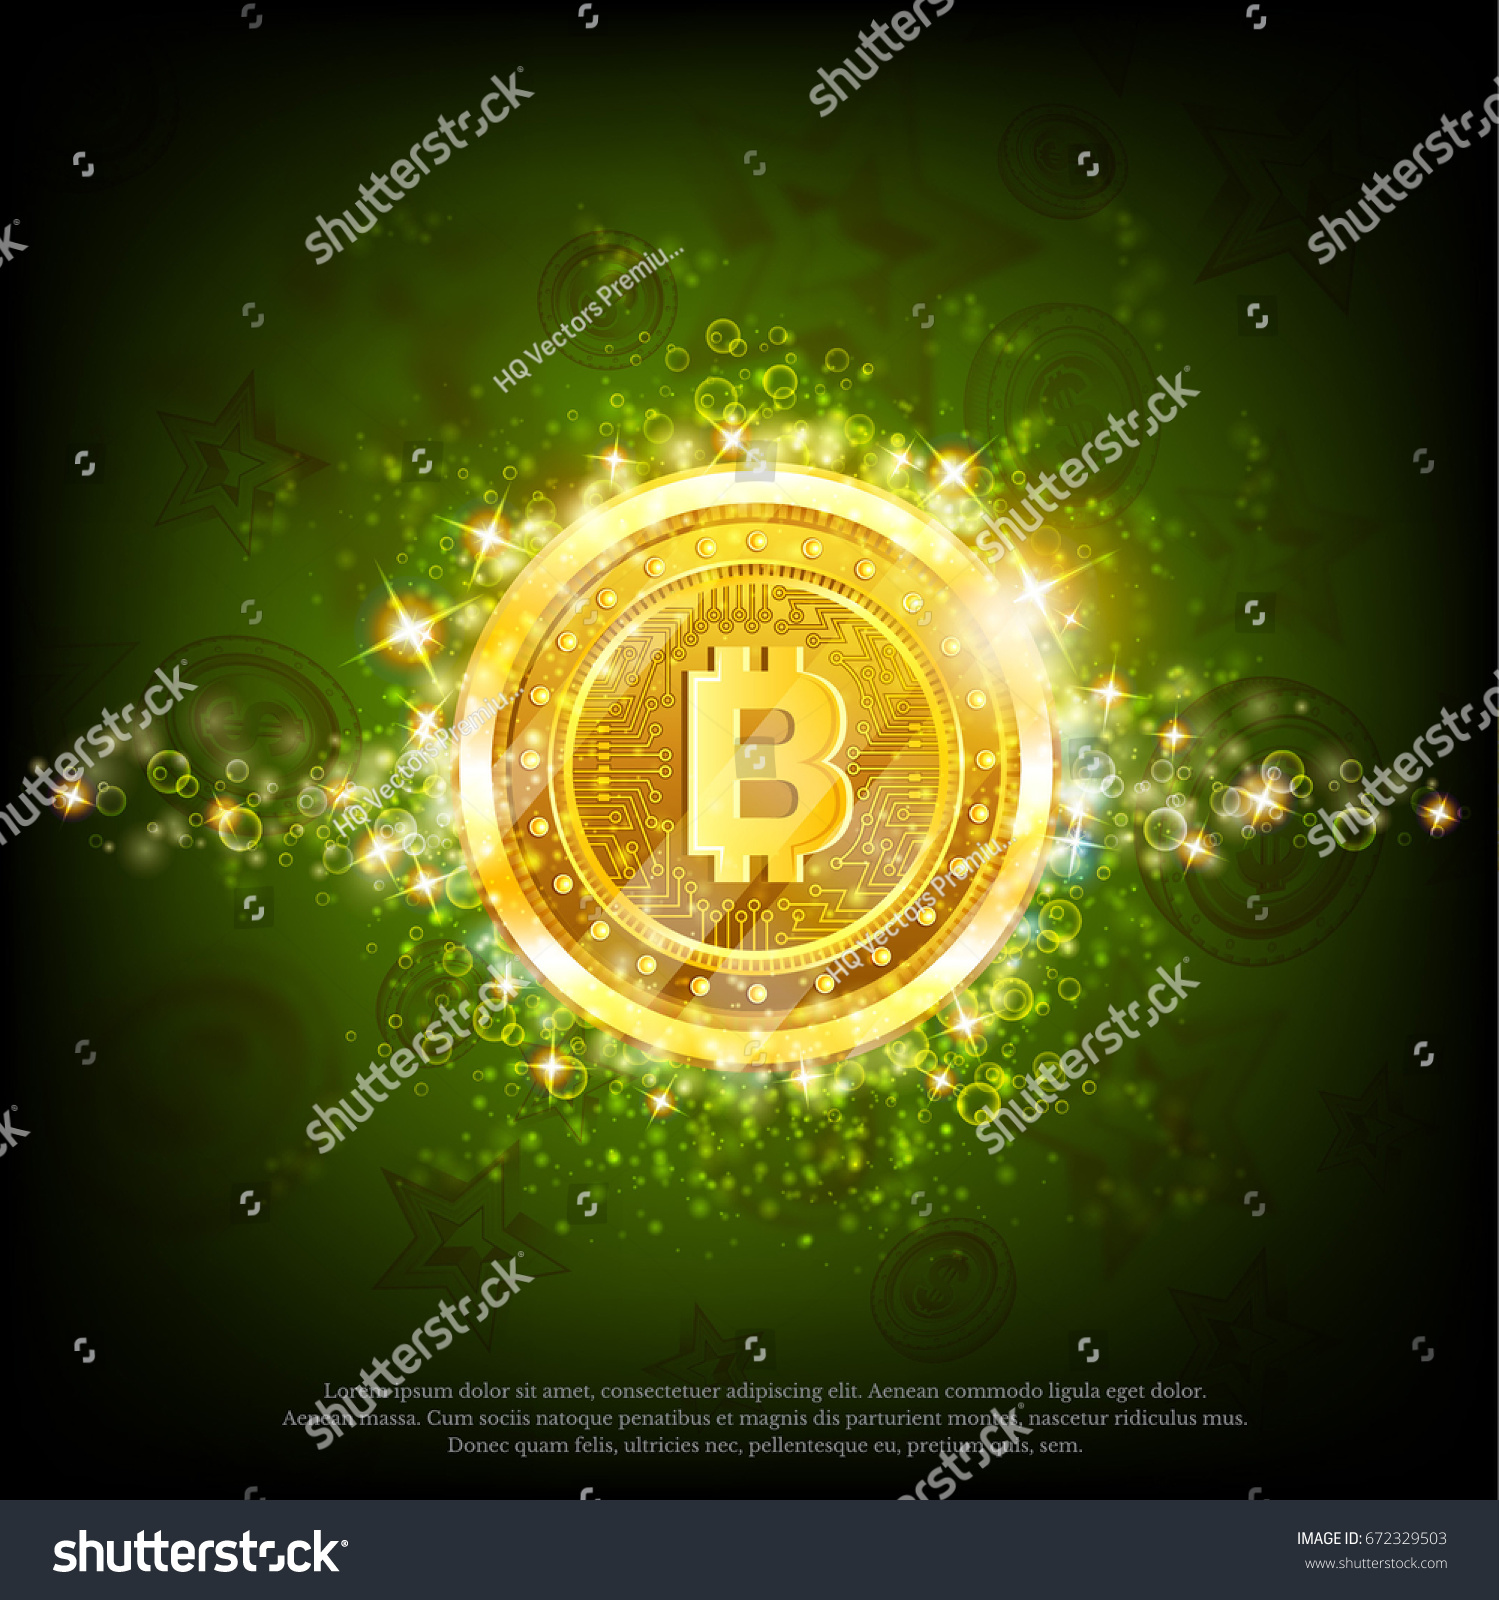 SVG of Golden bit coins with shiny sparkles in center on green glossy background svg